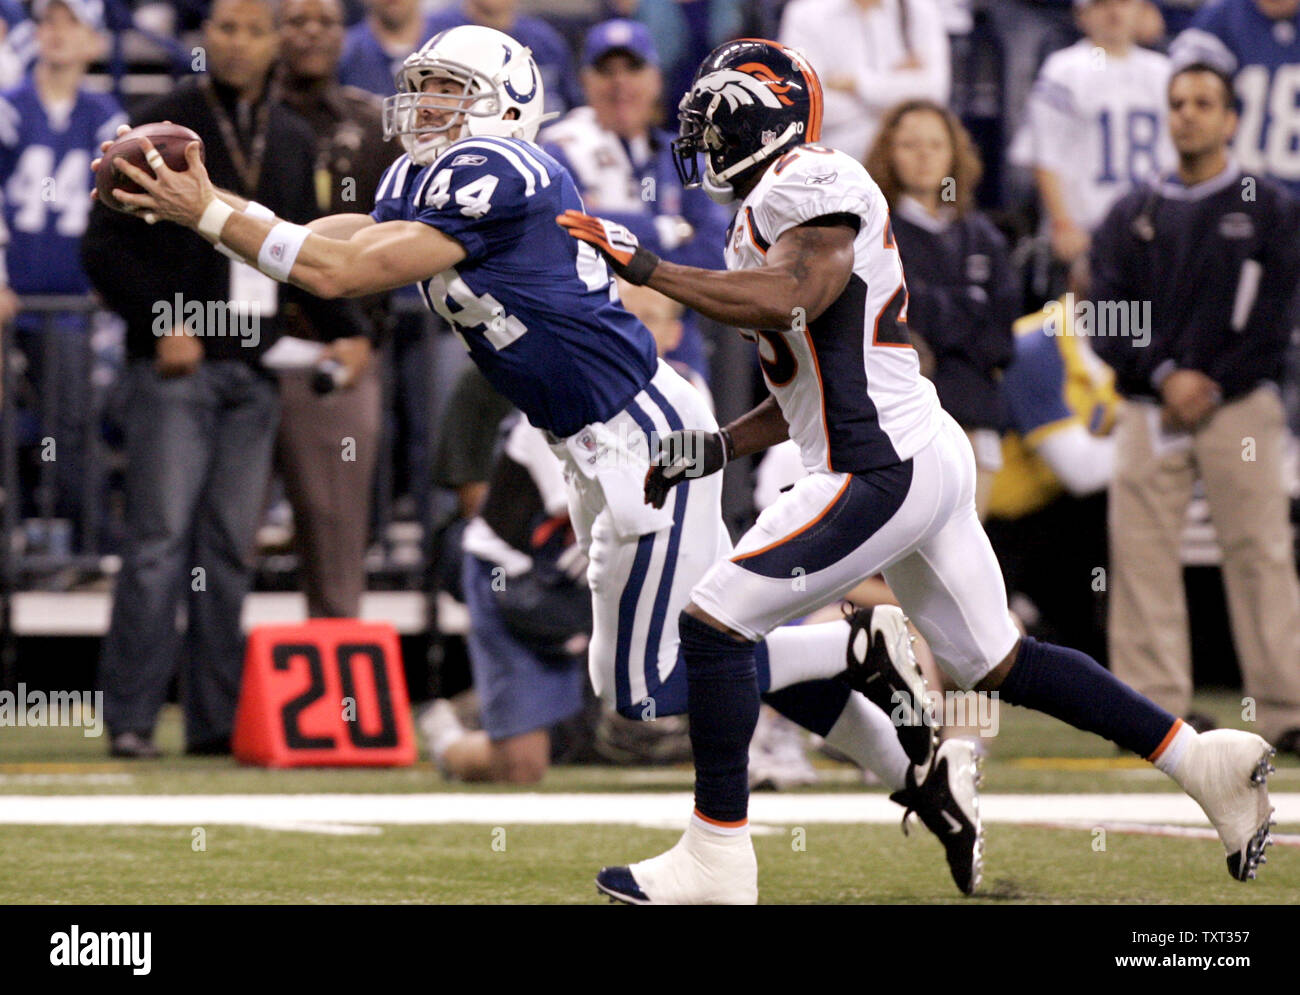 Indianapolis Colts tight end Dallas Clark (44) grabs a 22-yard catch in front of Denver Broncos safety Brian Dawkins (20) during the second quarter at Lucas Oil Field in Indianapolis on December 13, 2009. UPI /Mark Cowan Stock Photo